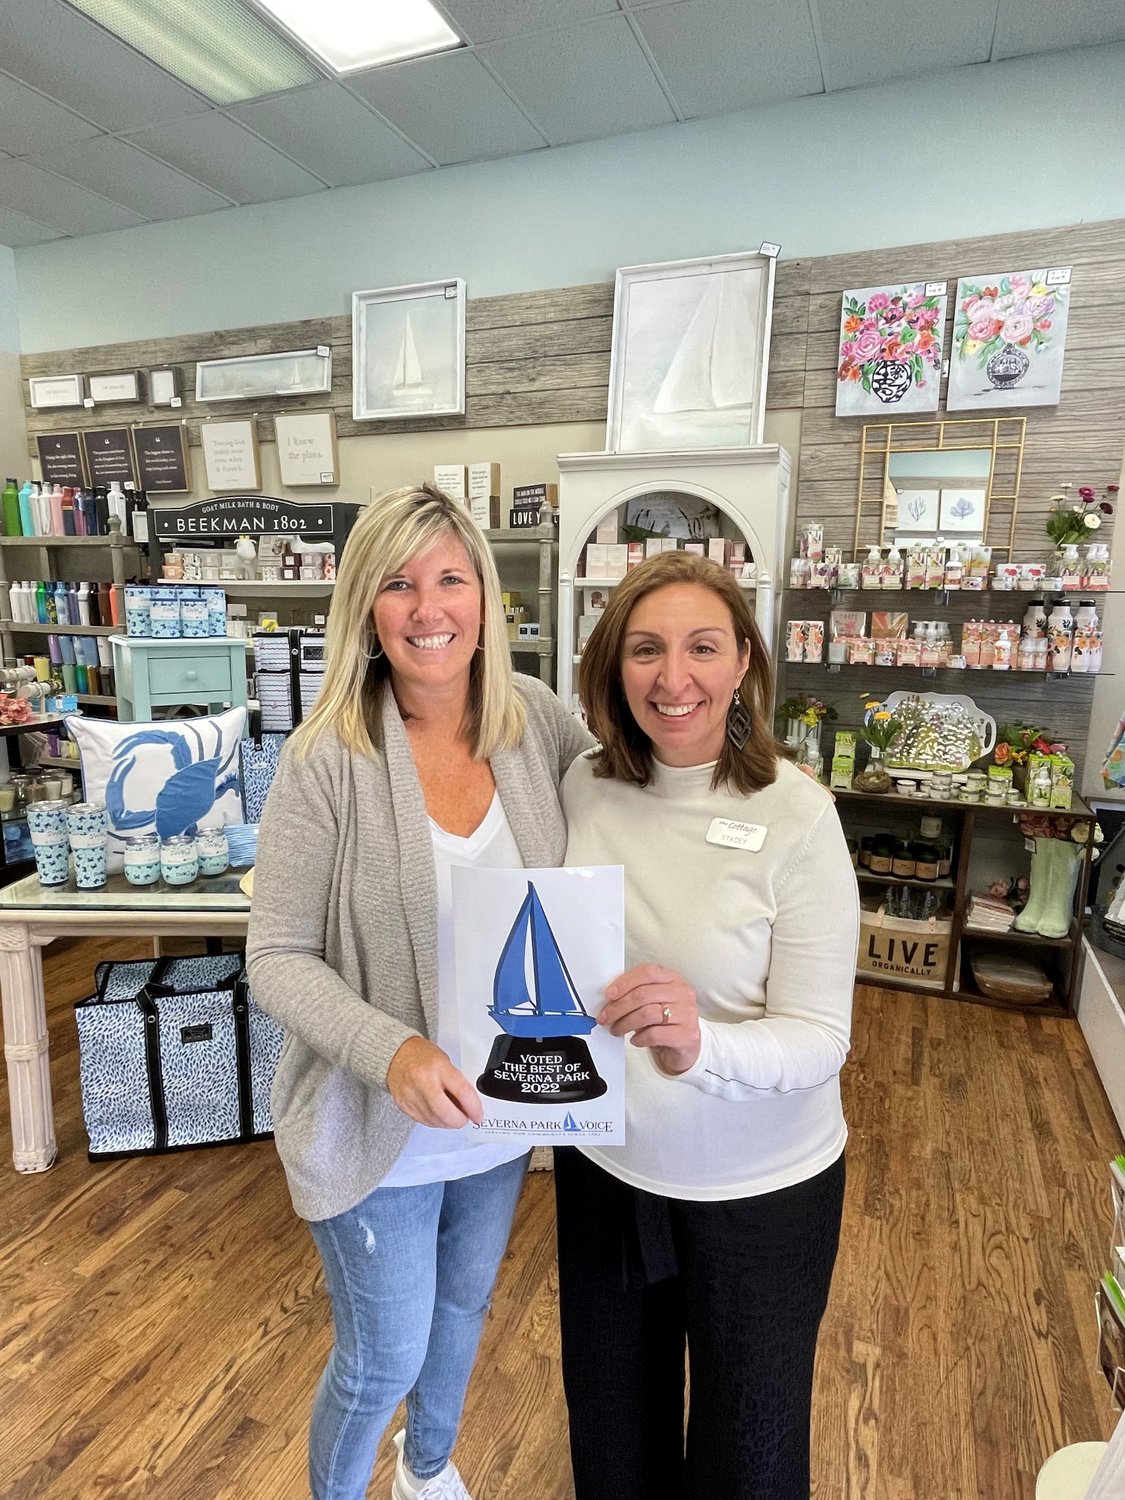 Courtney Caughy (left) and Stacey Rinker accepted The Cottage's awards for Best Gift Shop and Best Home Décor.